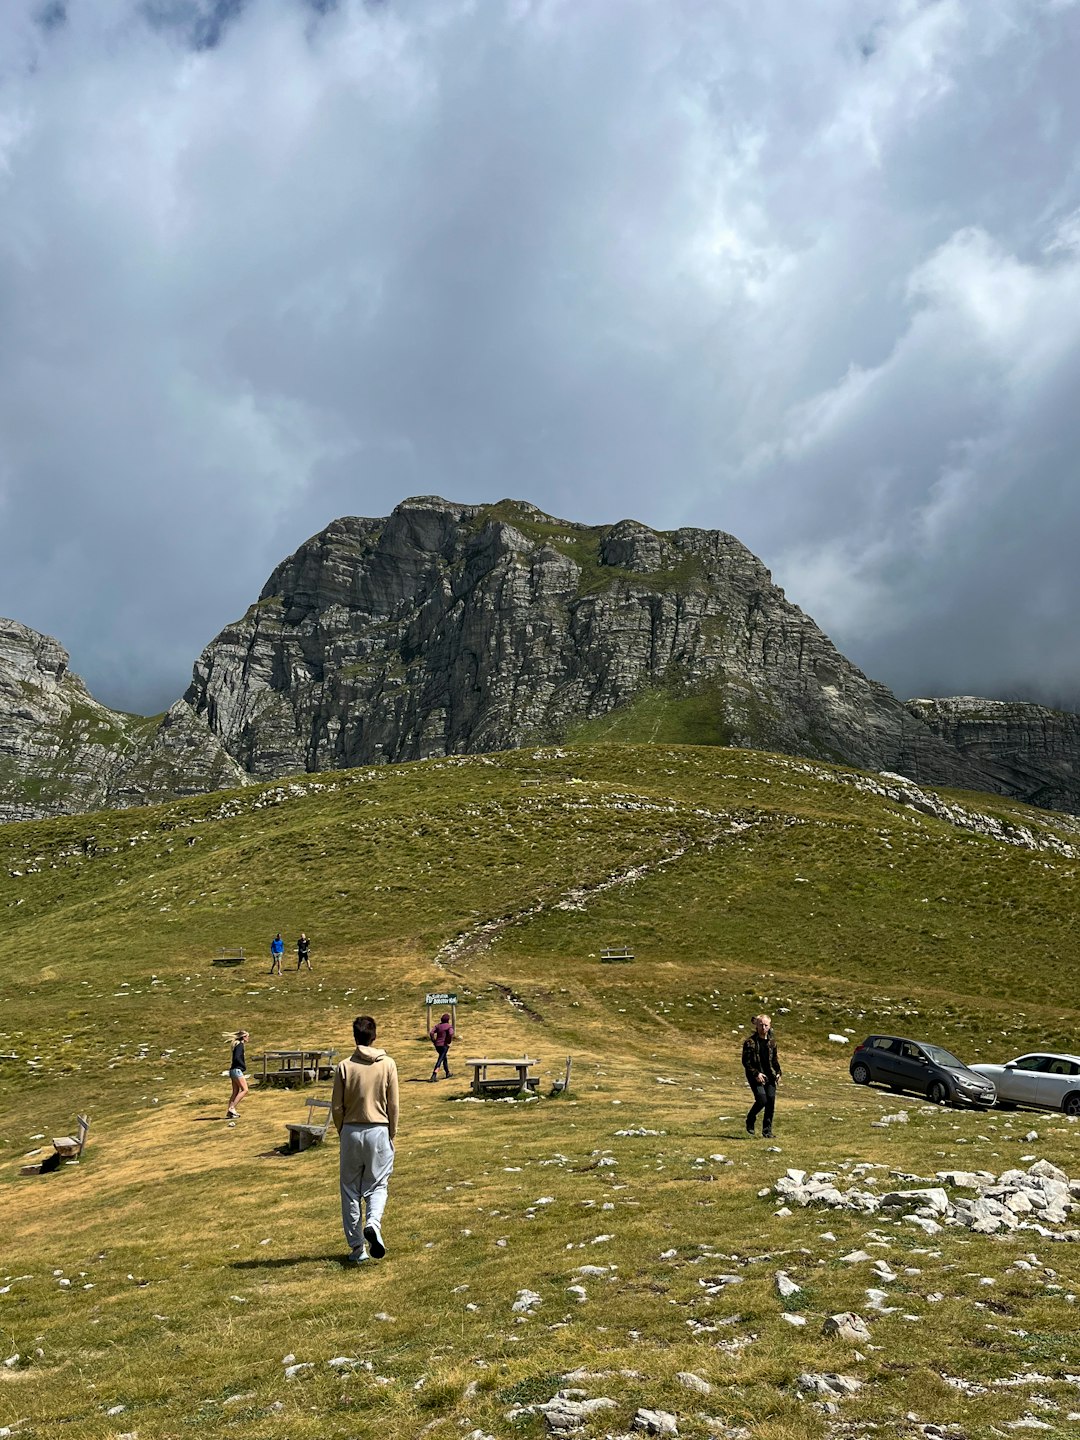 travelers stories about Highland in Durmitor, Montenegro